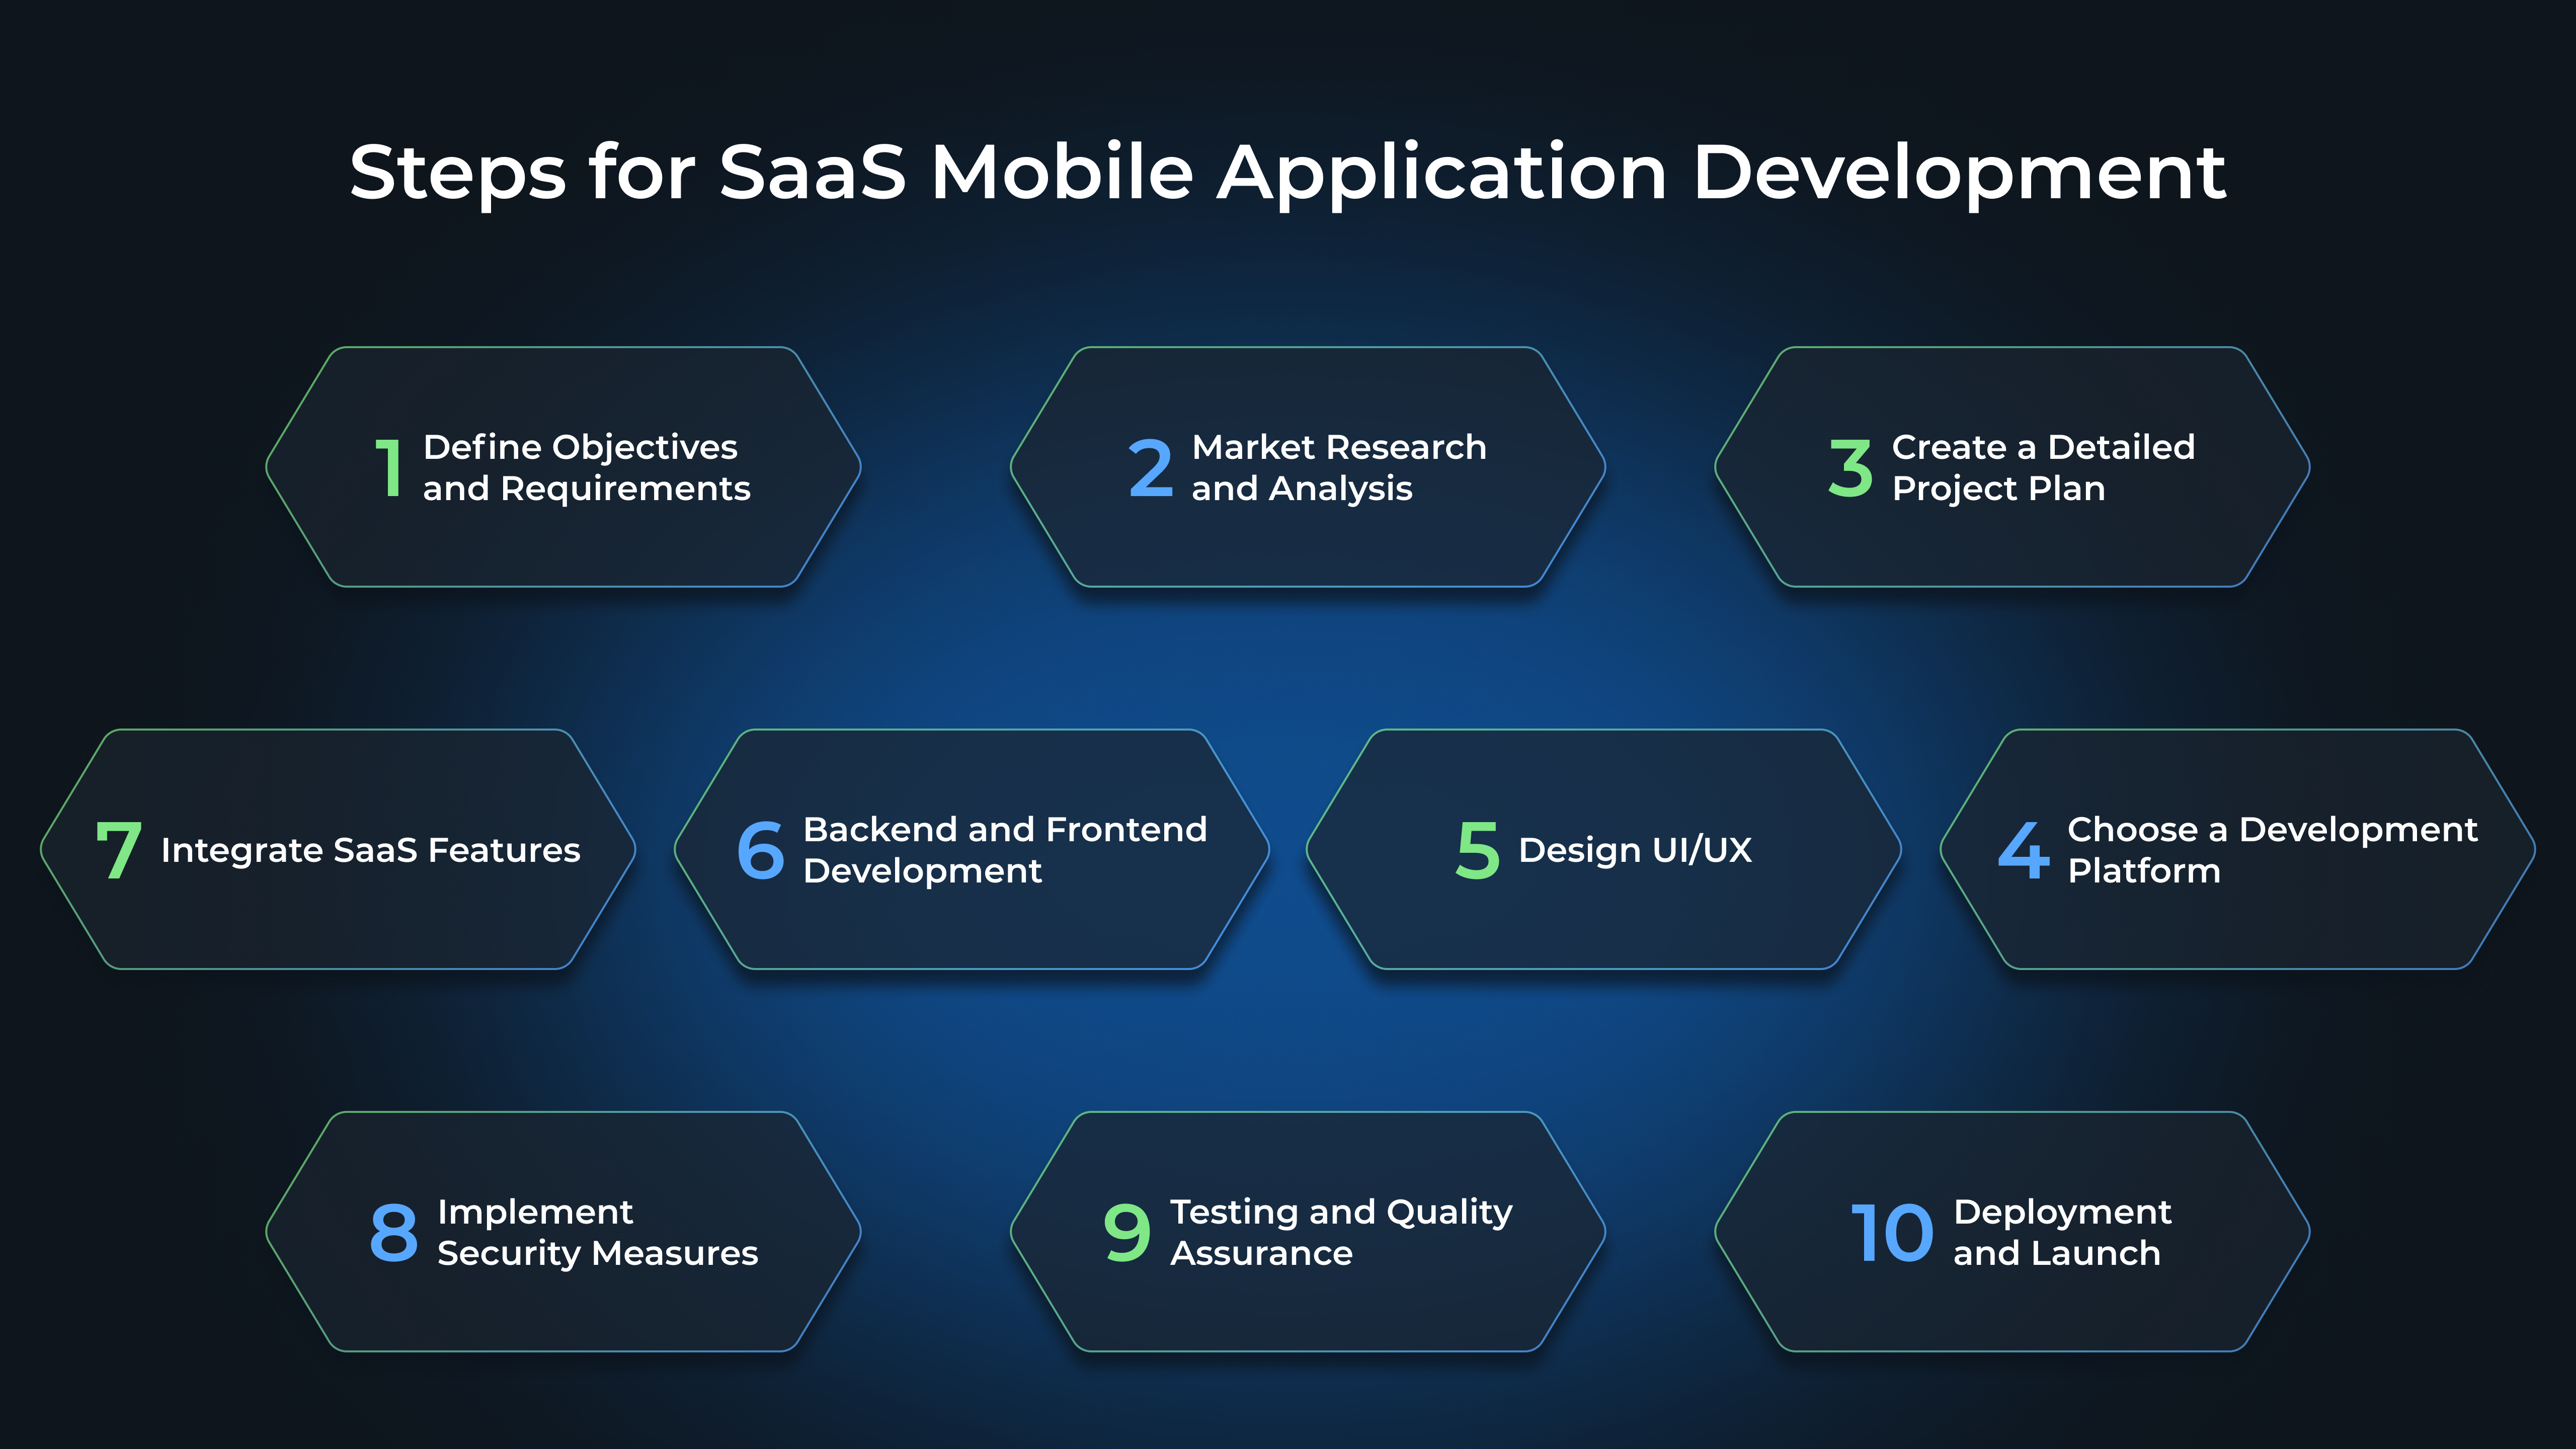 Steps for SaaS Mobile Application Development: Define Objectives and Requirements, Market Research and Analysis, Create a Detailed Project Plan, Choose a Development Platform, Design UI/UX, Backend and Frontend Development, Integrate SaaS Features, Implement Security Measures, Testing and Quality Assurance, Deployment and Launch
